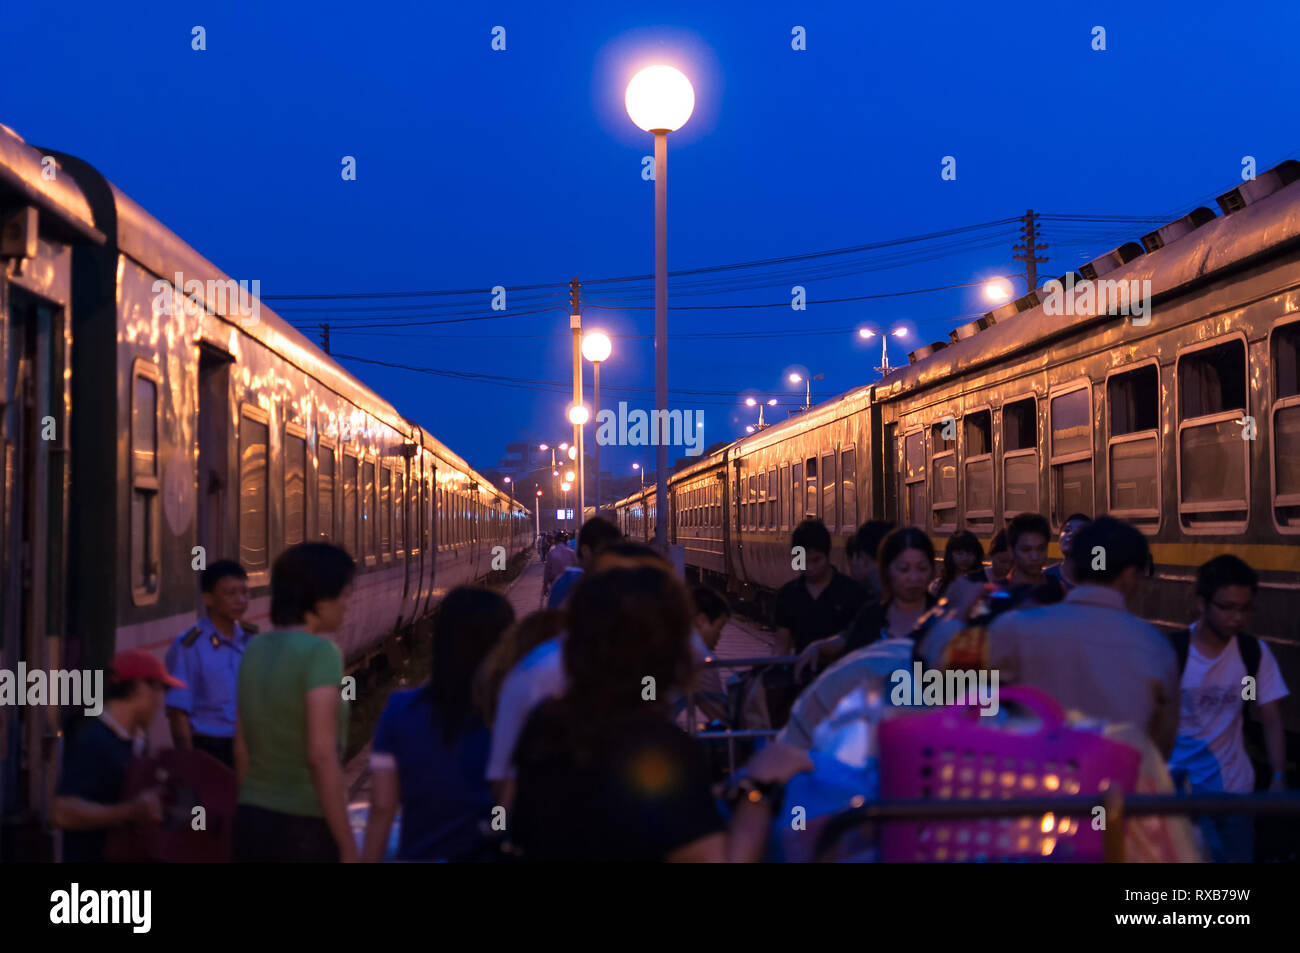 Passengers on a platform with trains either side at Hanoi railway station (Ga Hà Nội) in early morning, Hanoi, Vietnam Stock Photo